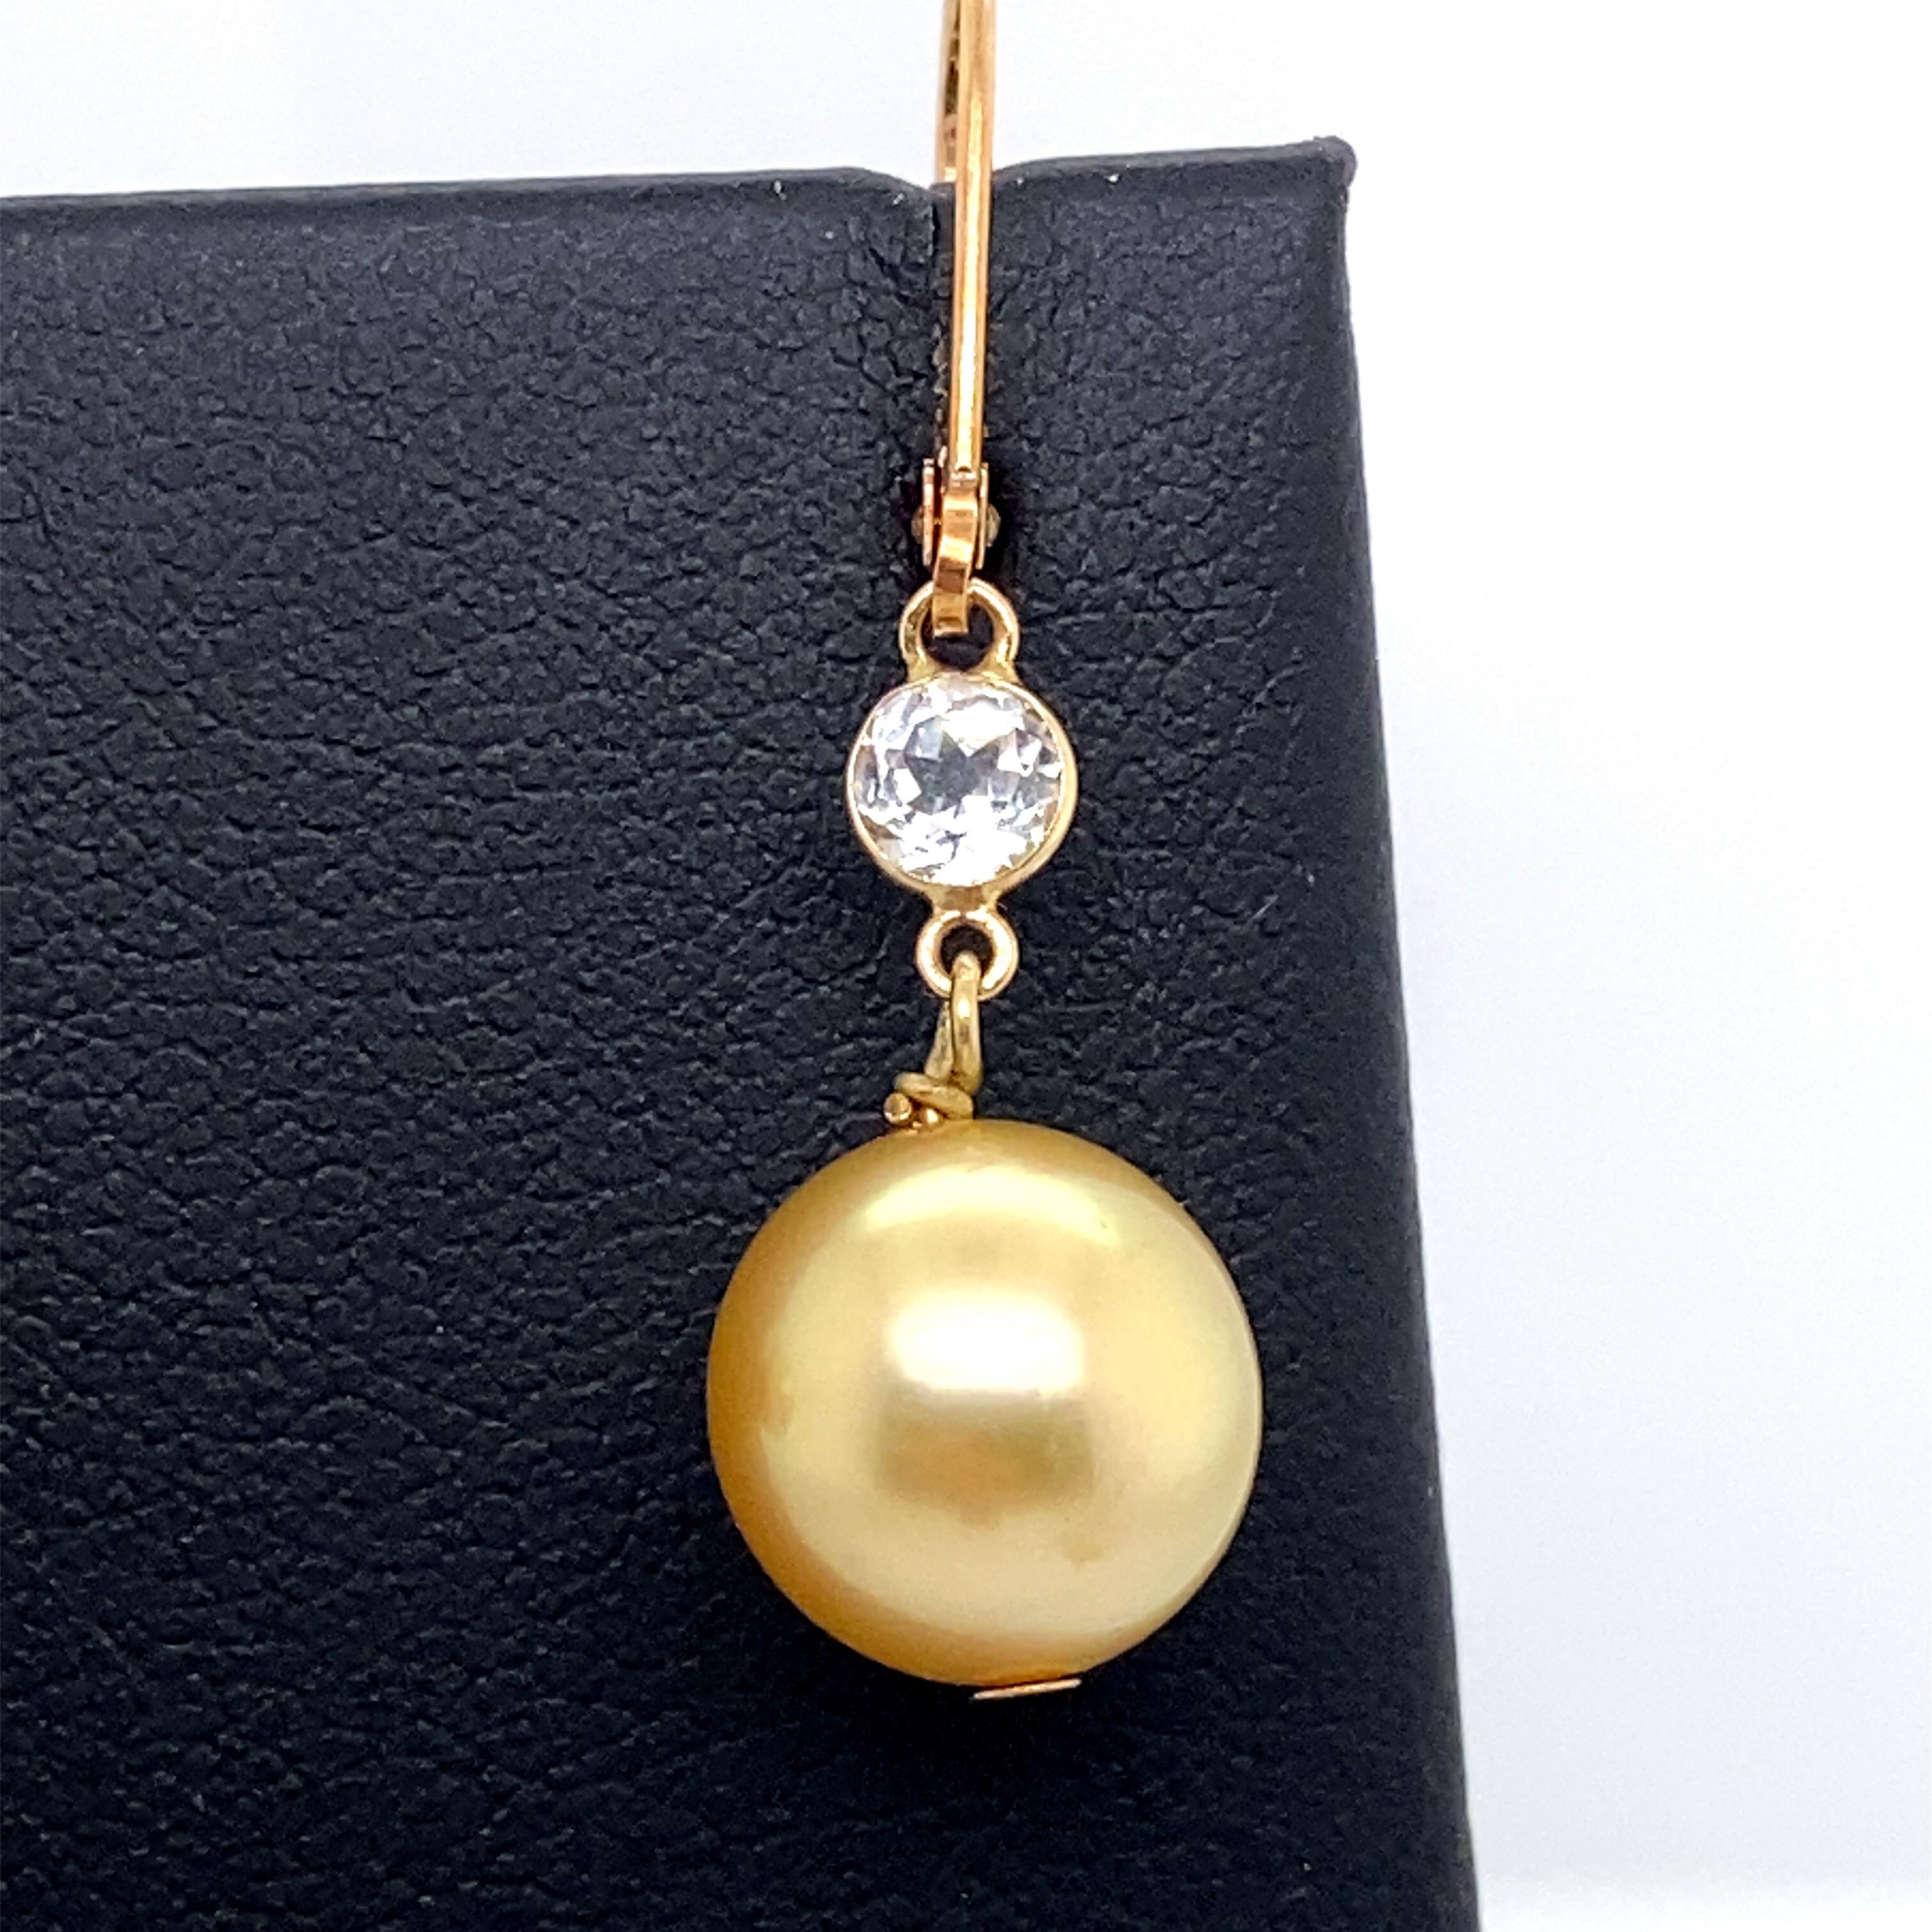 14K Yellow gold drop earrings featuring two golden pearls measuring 9-10 mm with round semi precious gemstones.  
Color G-H
Clarity SI